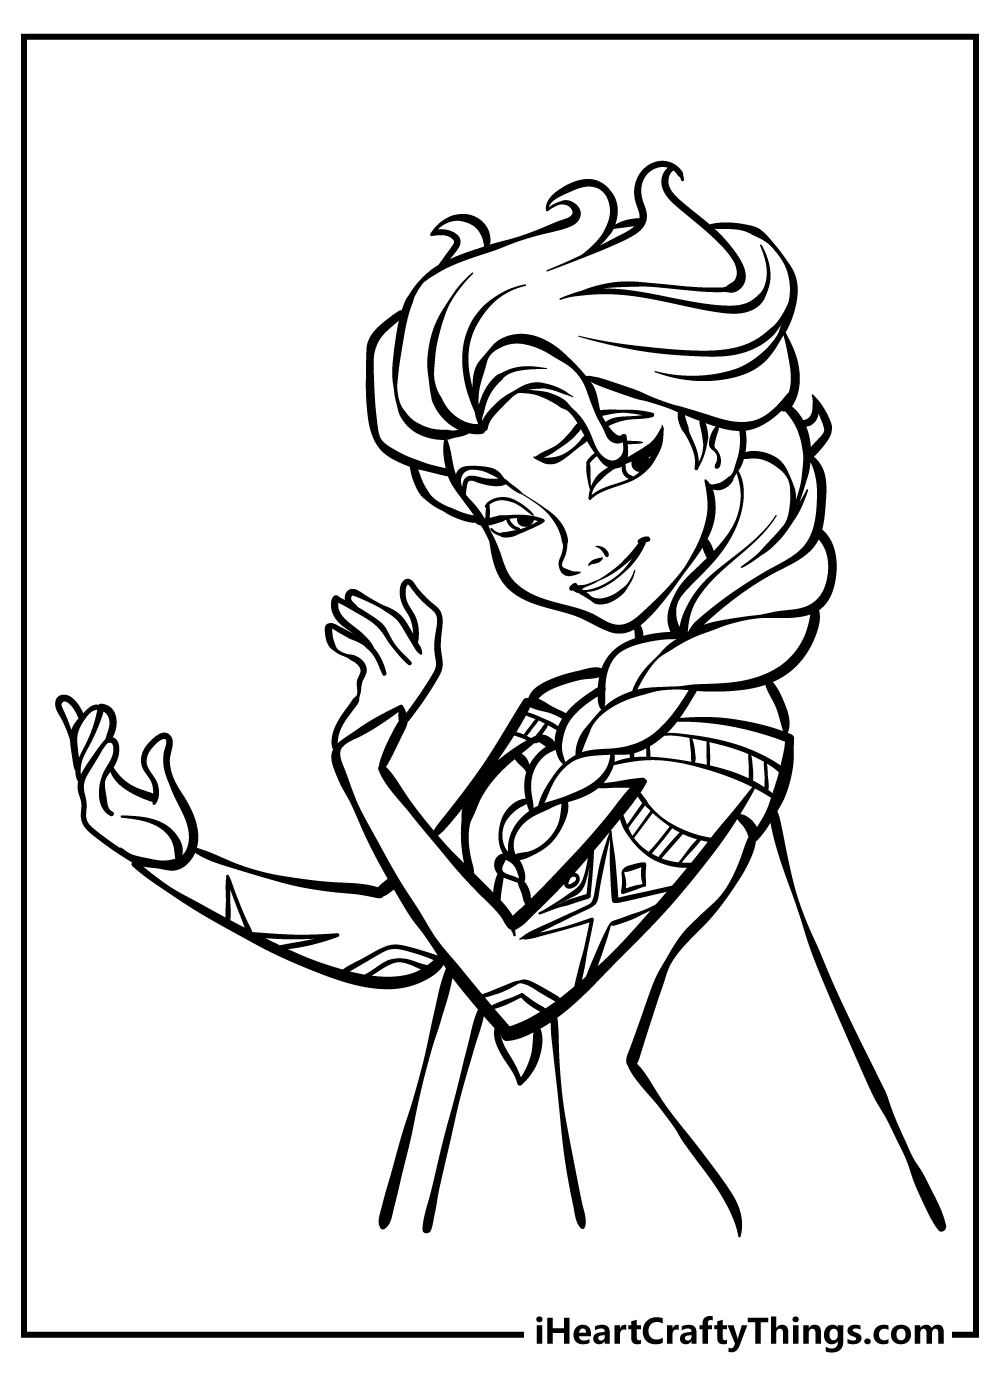 Elsa Coloring Pages for kids free download